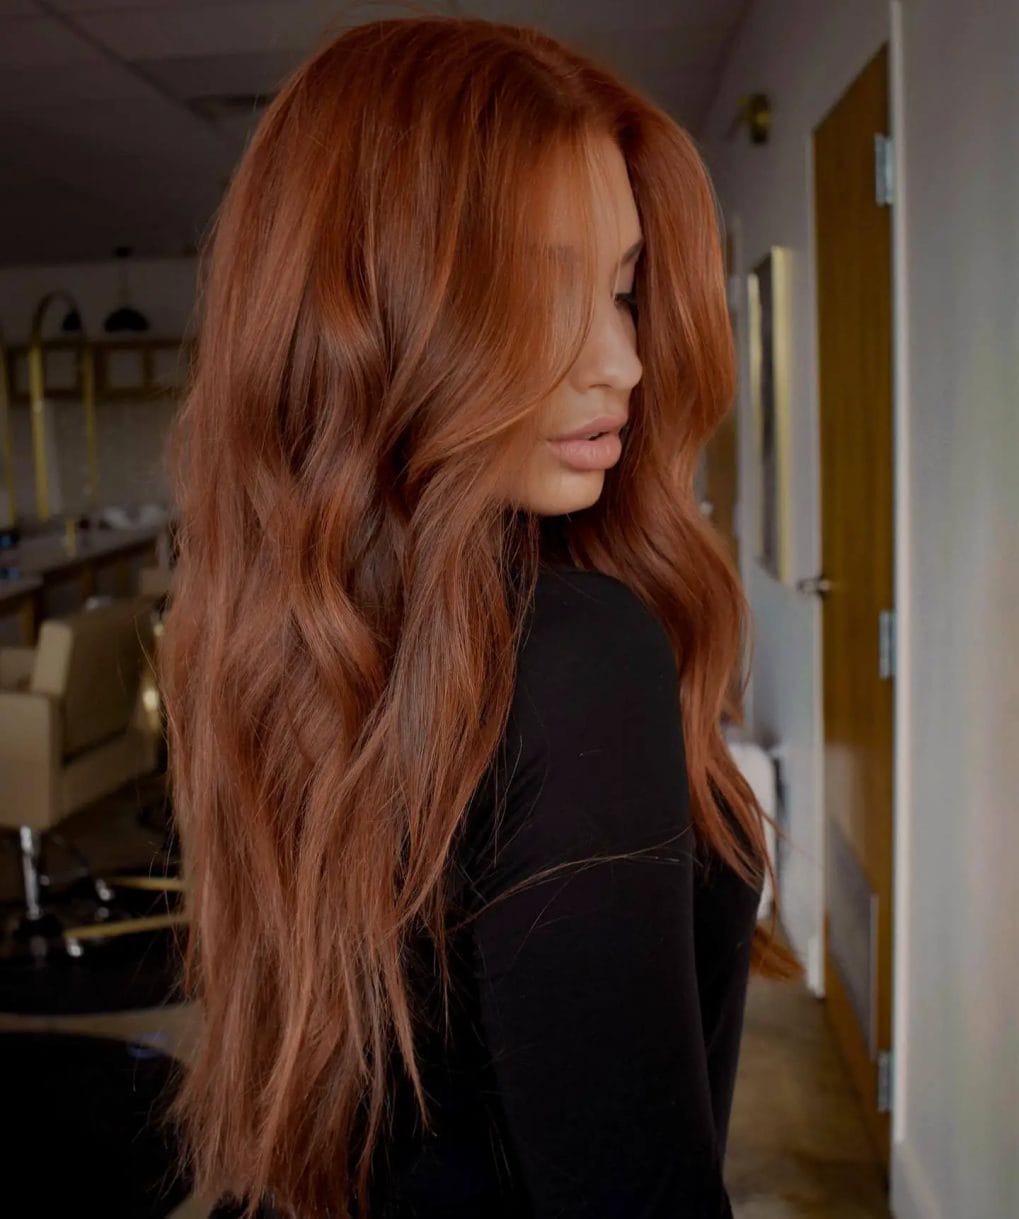 Muted copper hair in a relaxed, side-parted style with gentle waves.